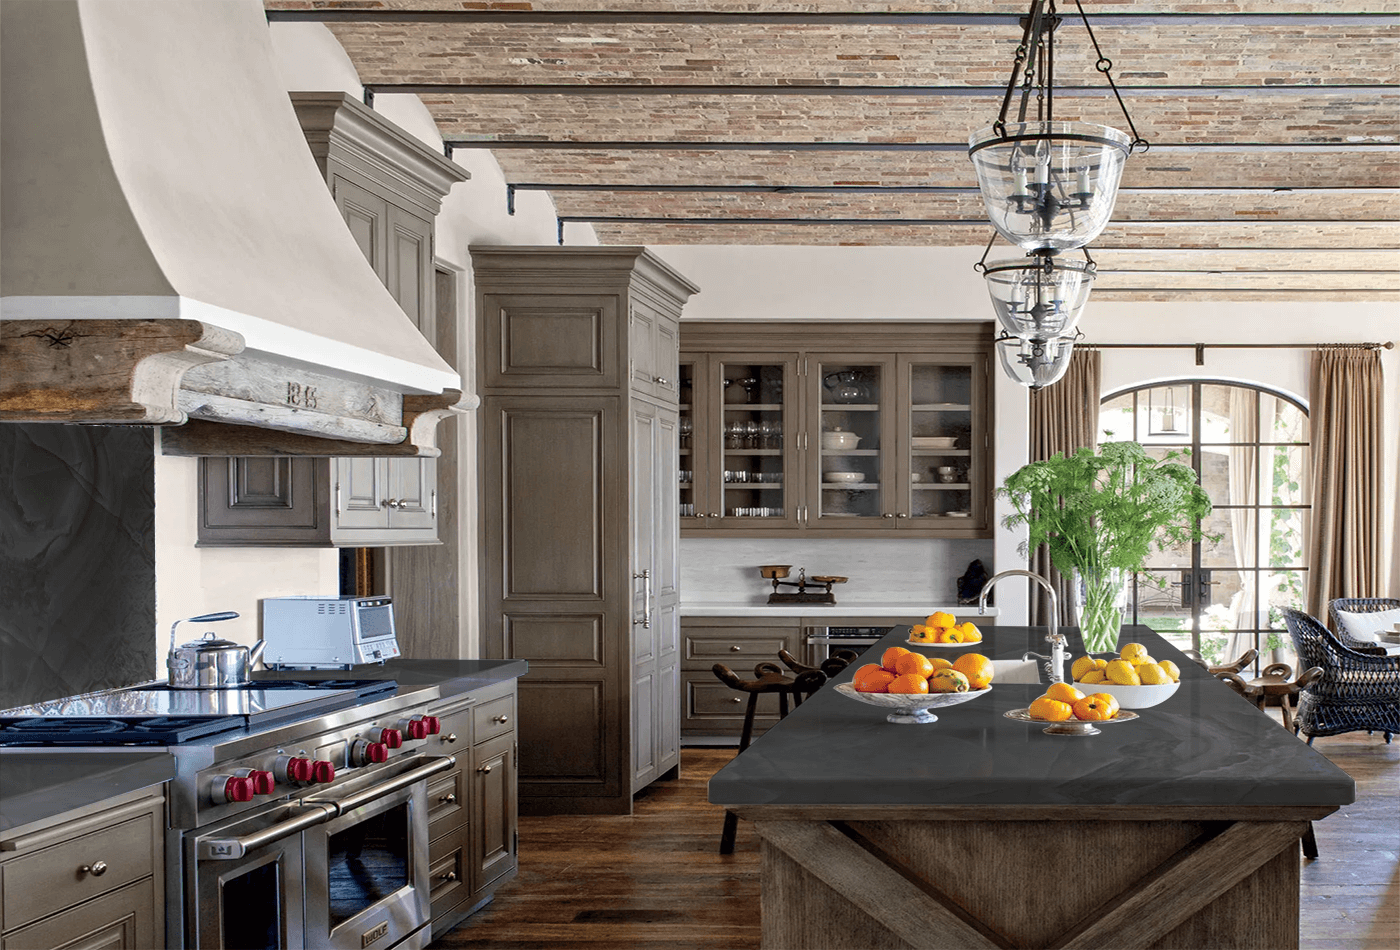 Normandy Styled Kitchens With a Contrasting Black Touch